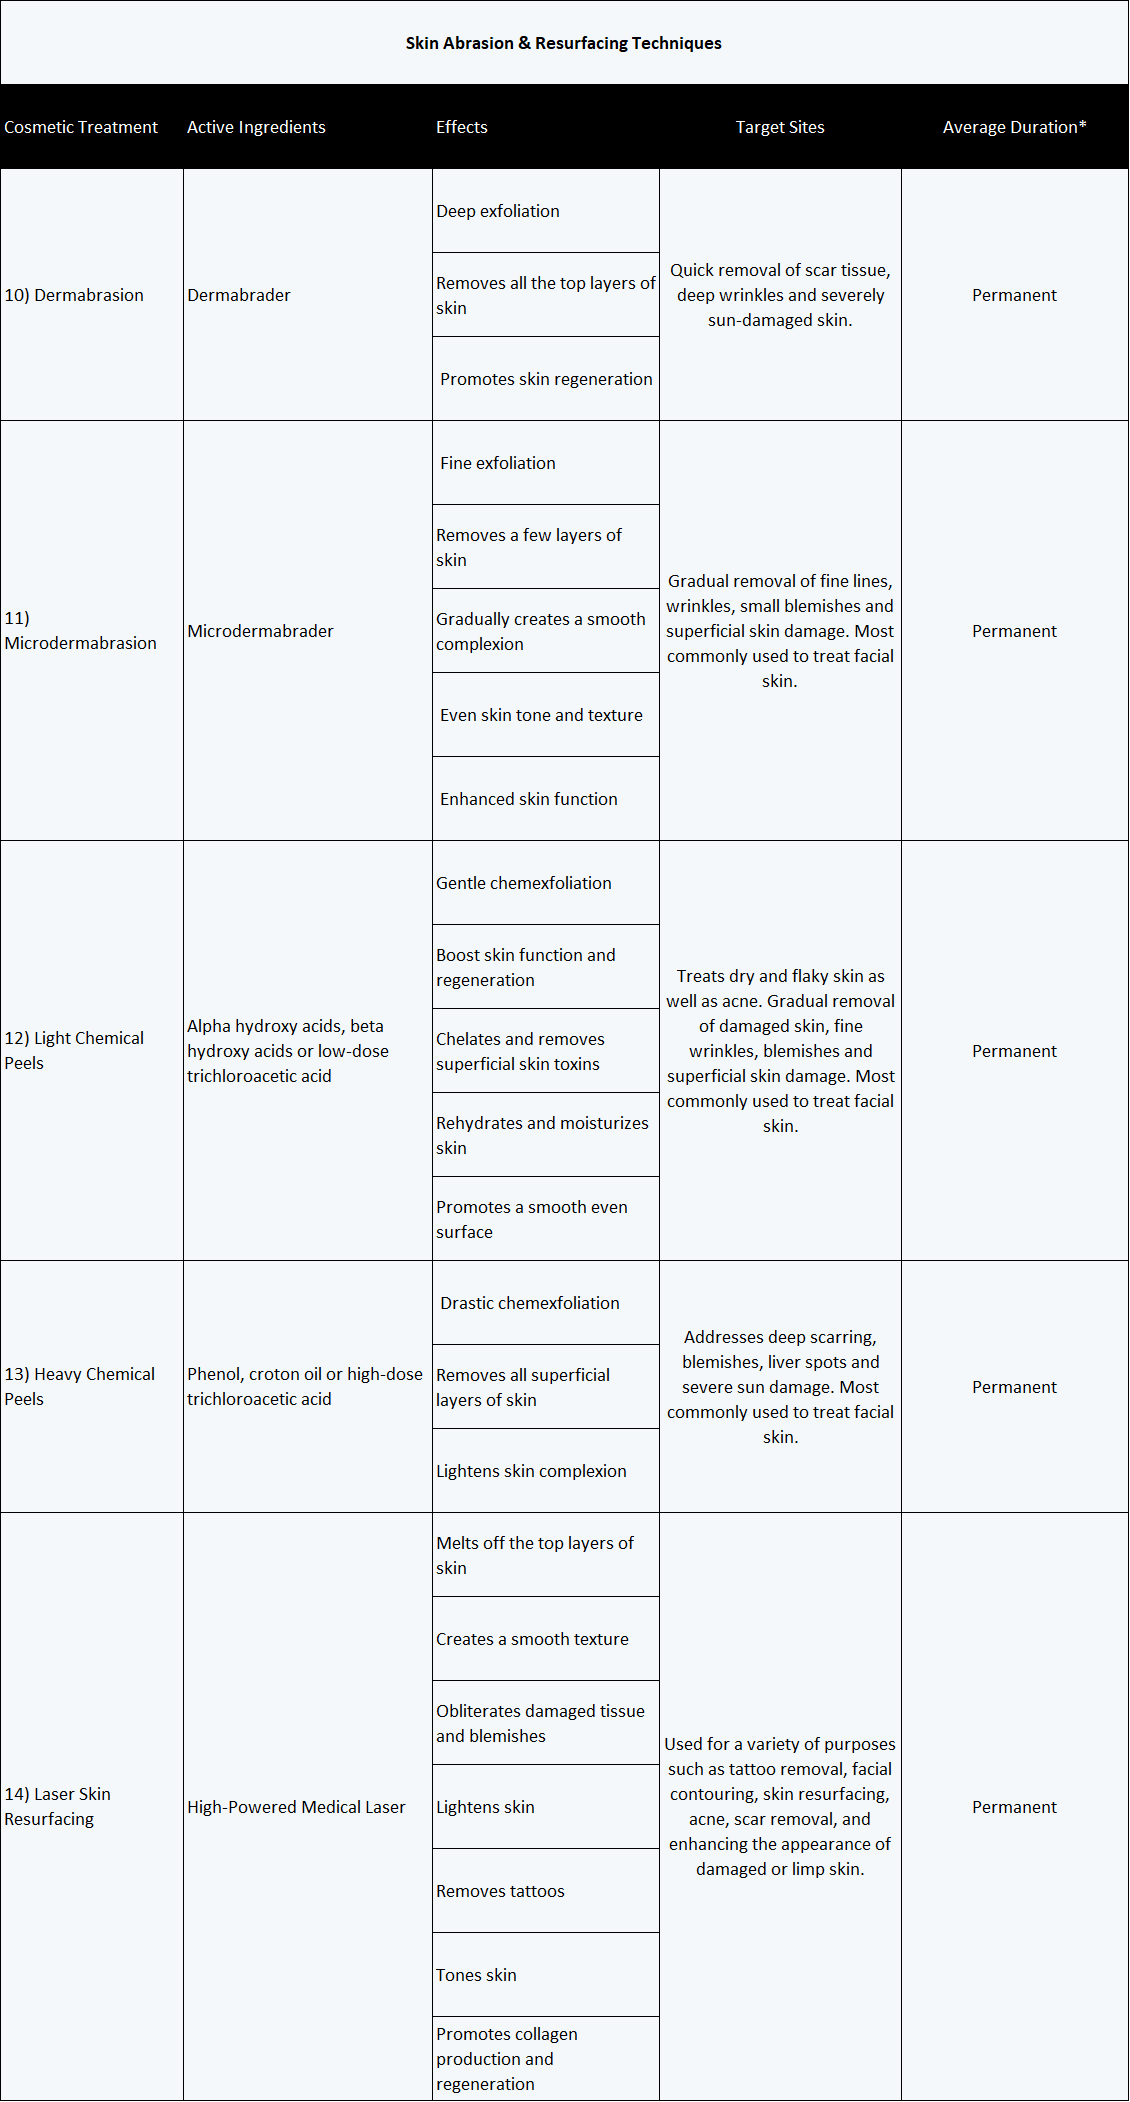 Table to show different cosmetic treatments of Skin abrasion and resurfacing techniques